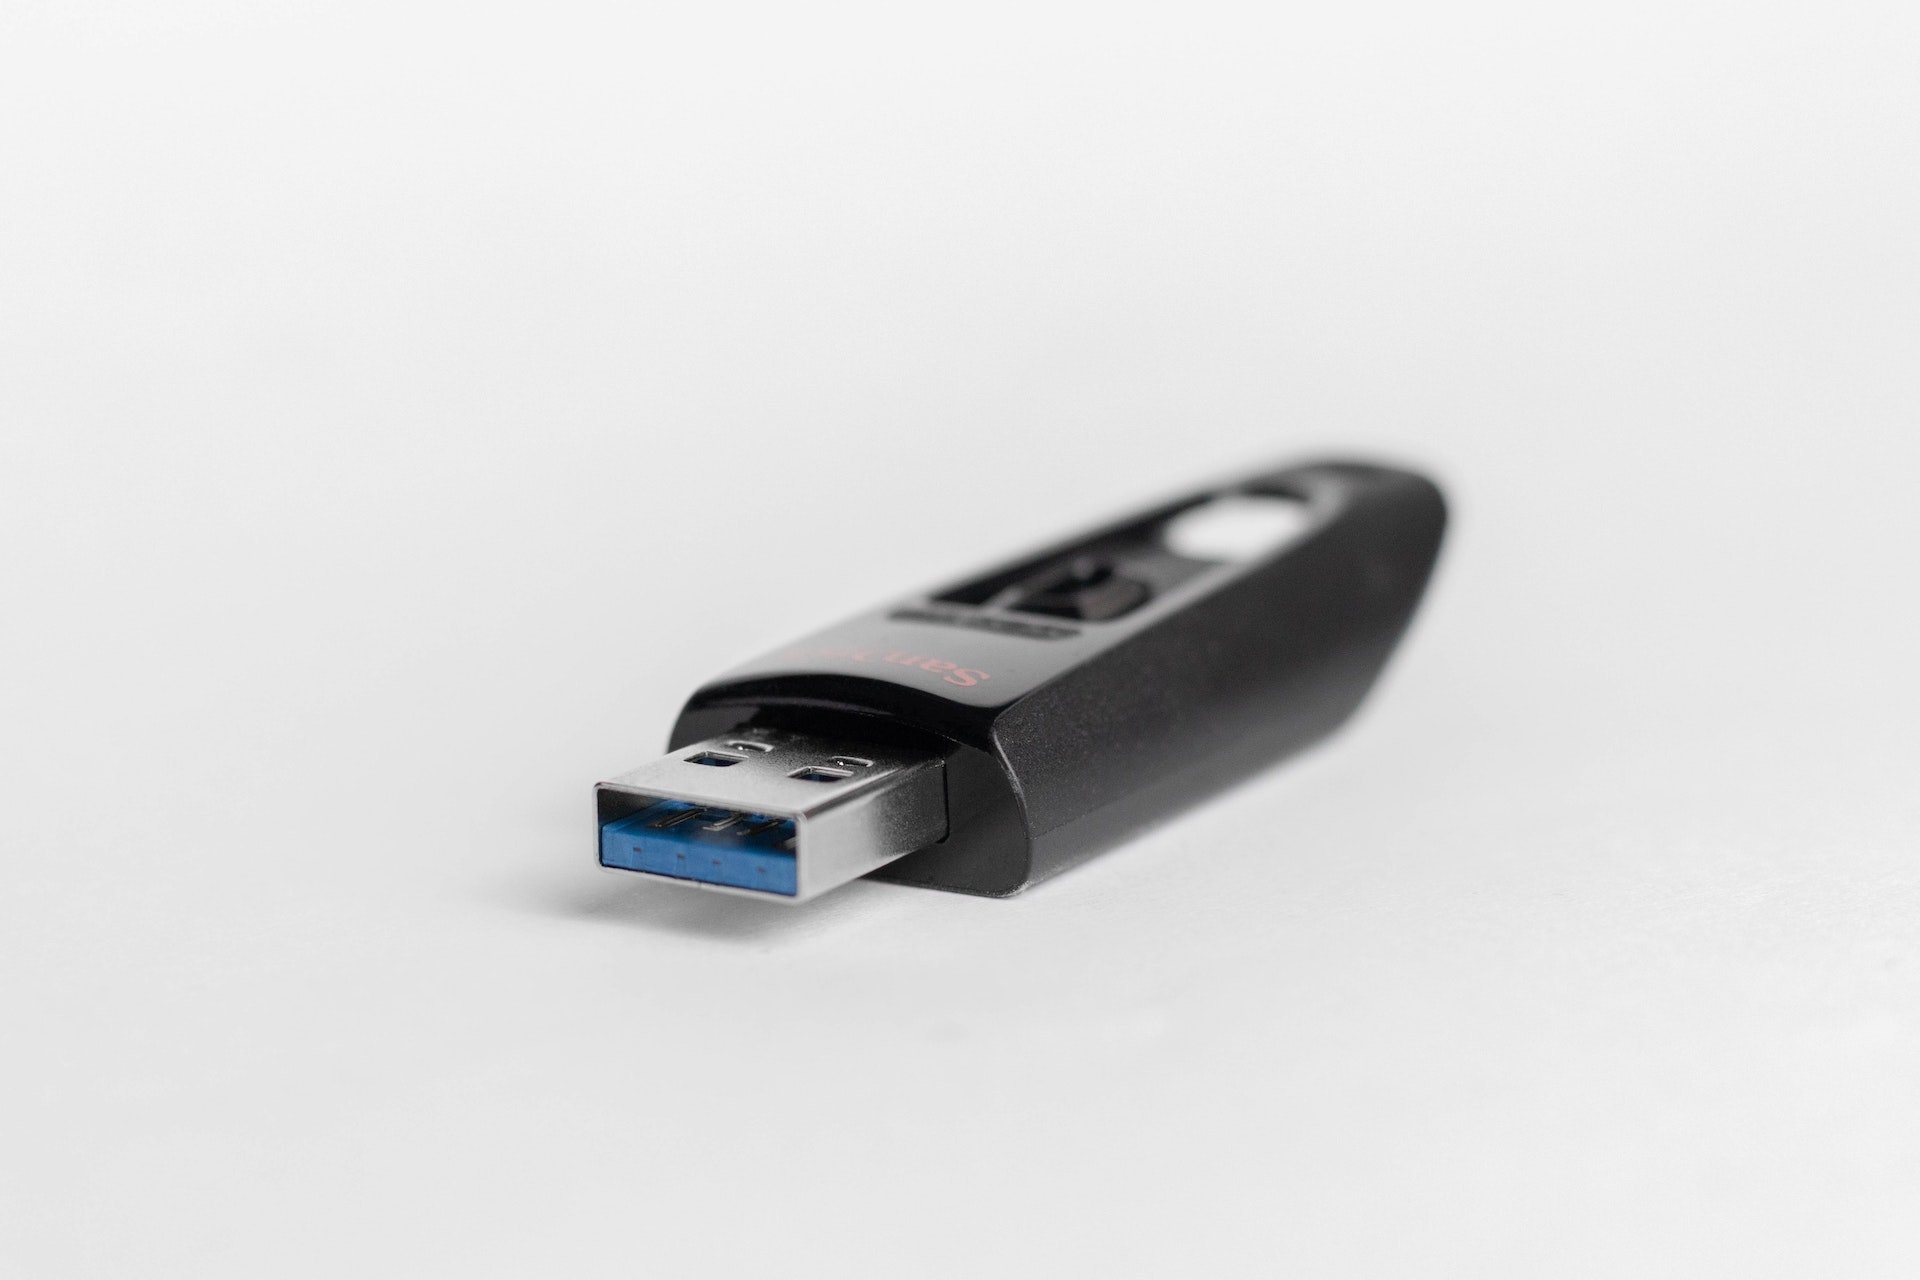 Download Usb Devices Driver